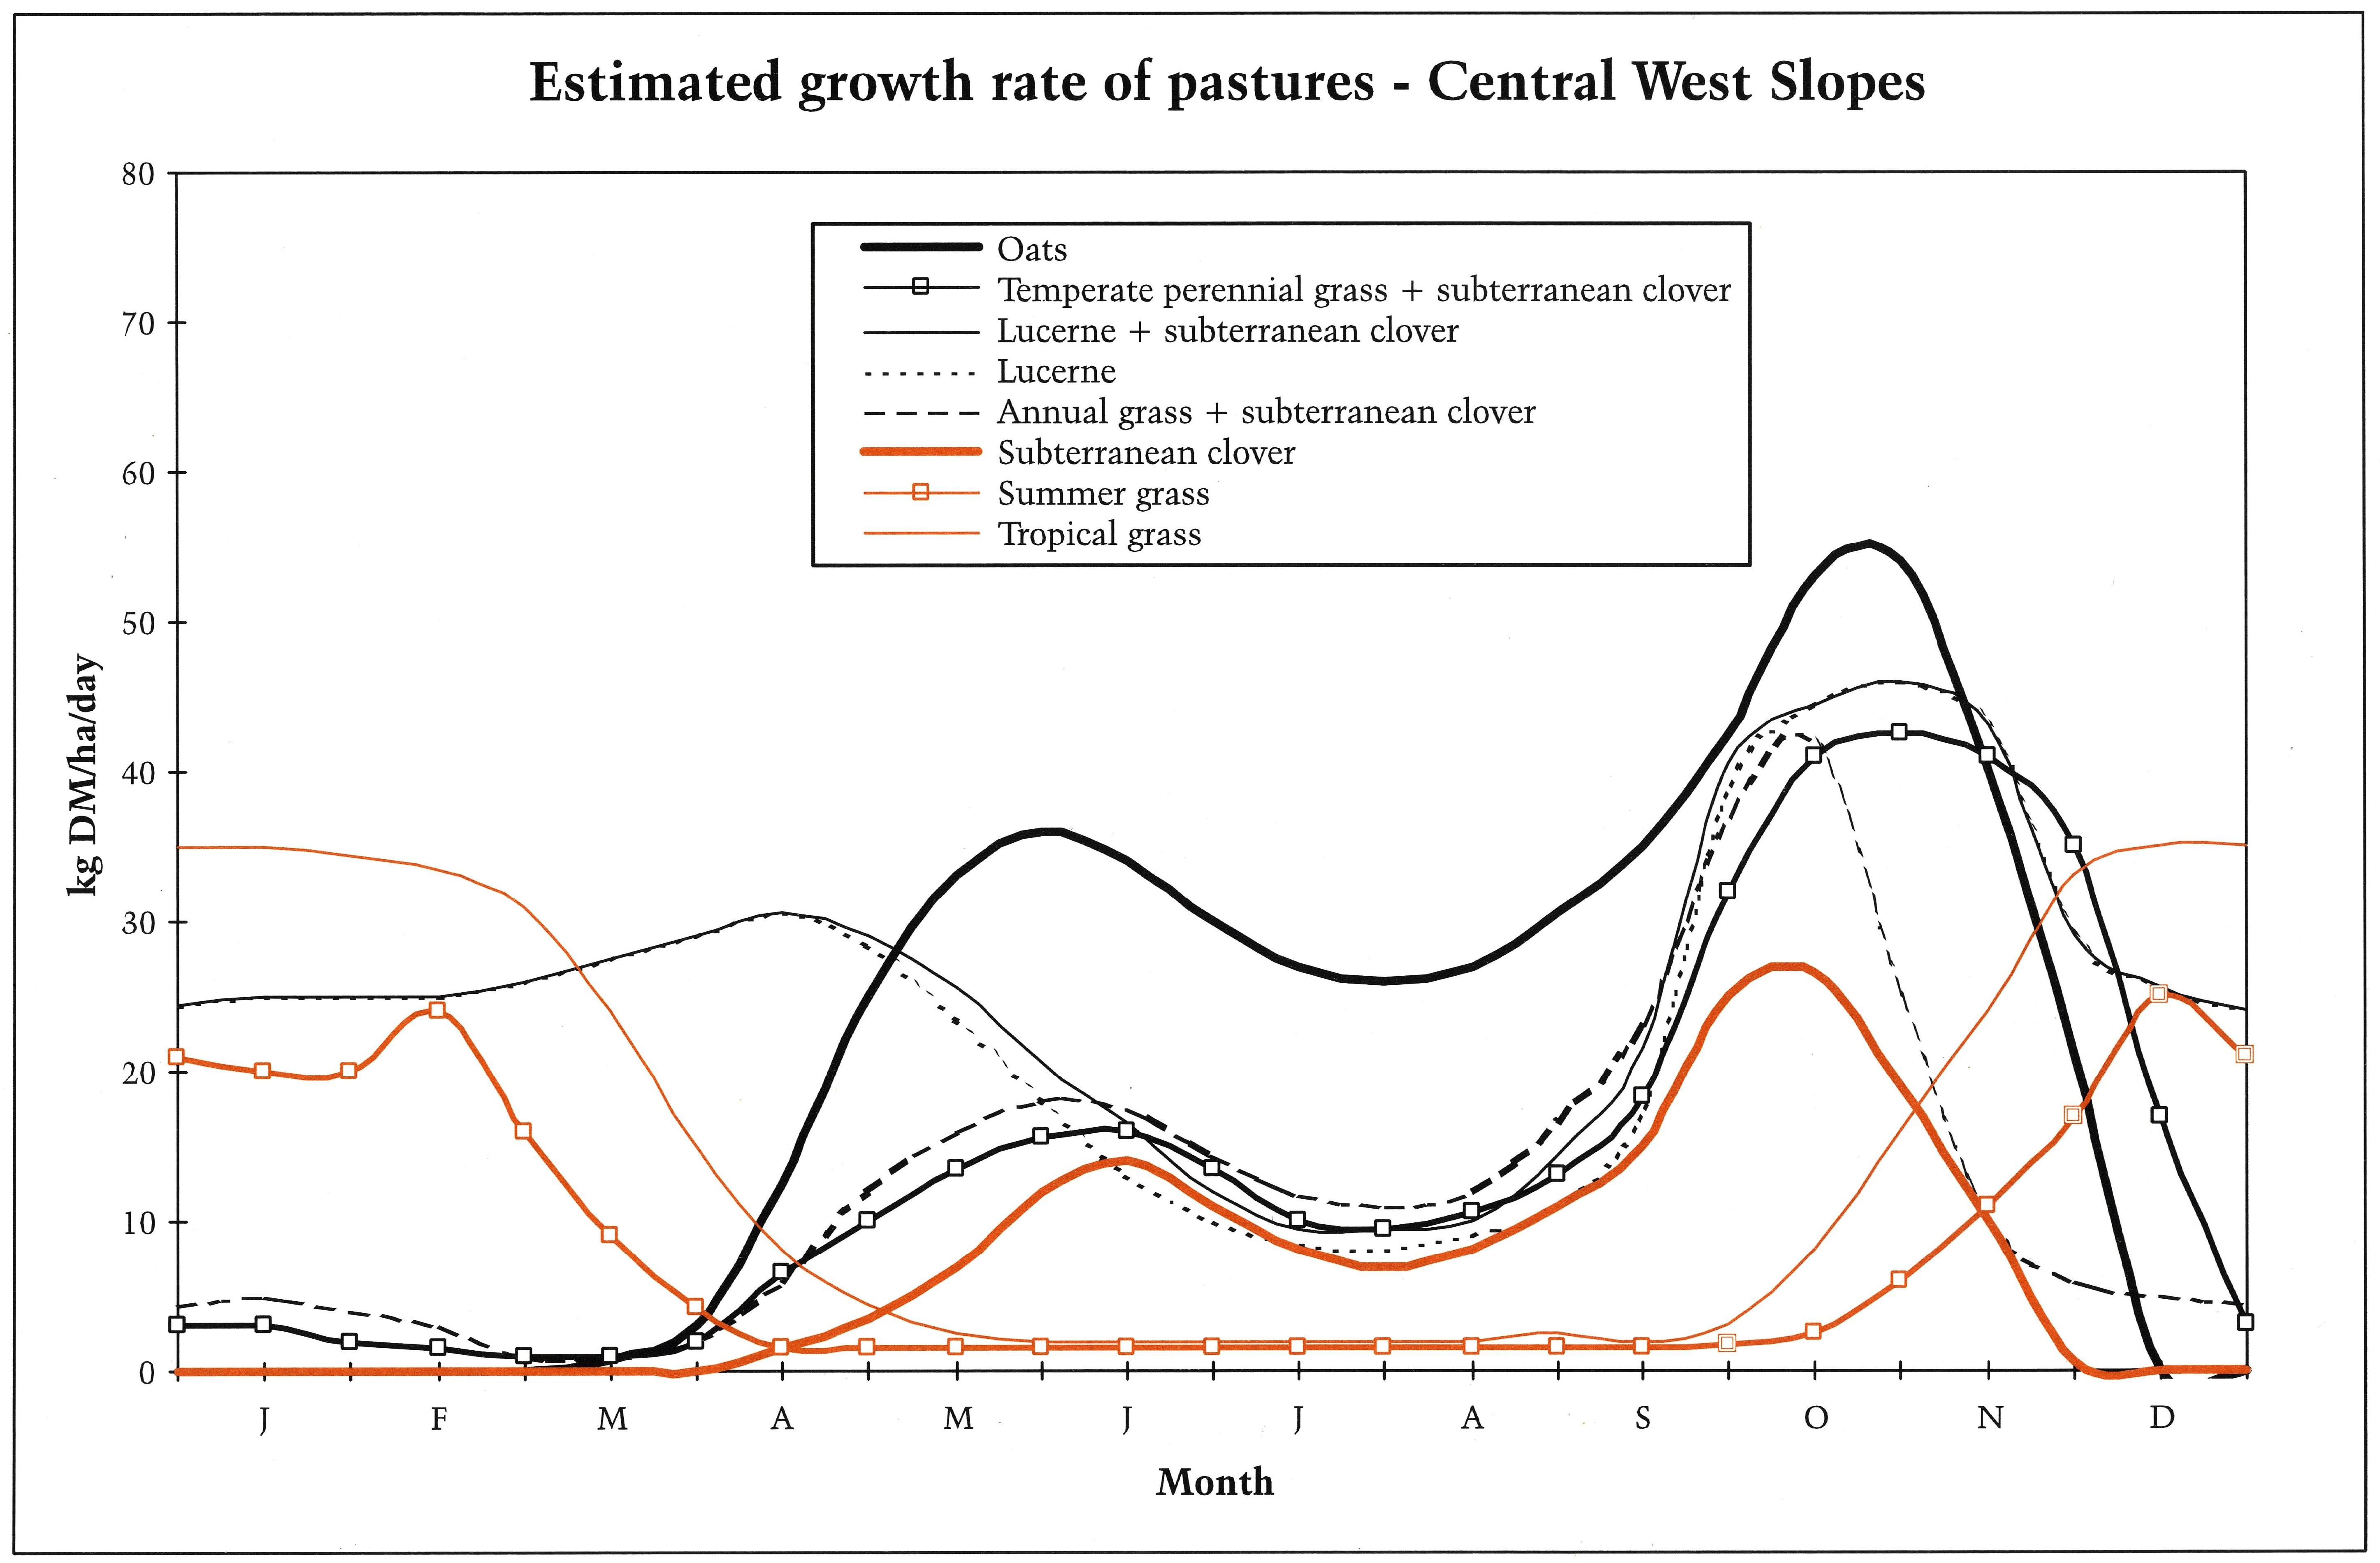 This figure shows the Estimated growth rate (kg Dry Matter/ha/day) of pasture species on the Central West Slopes of NSW (Source NSW DPI - Prograze)